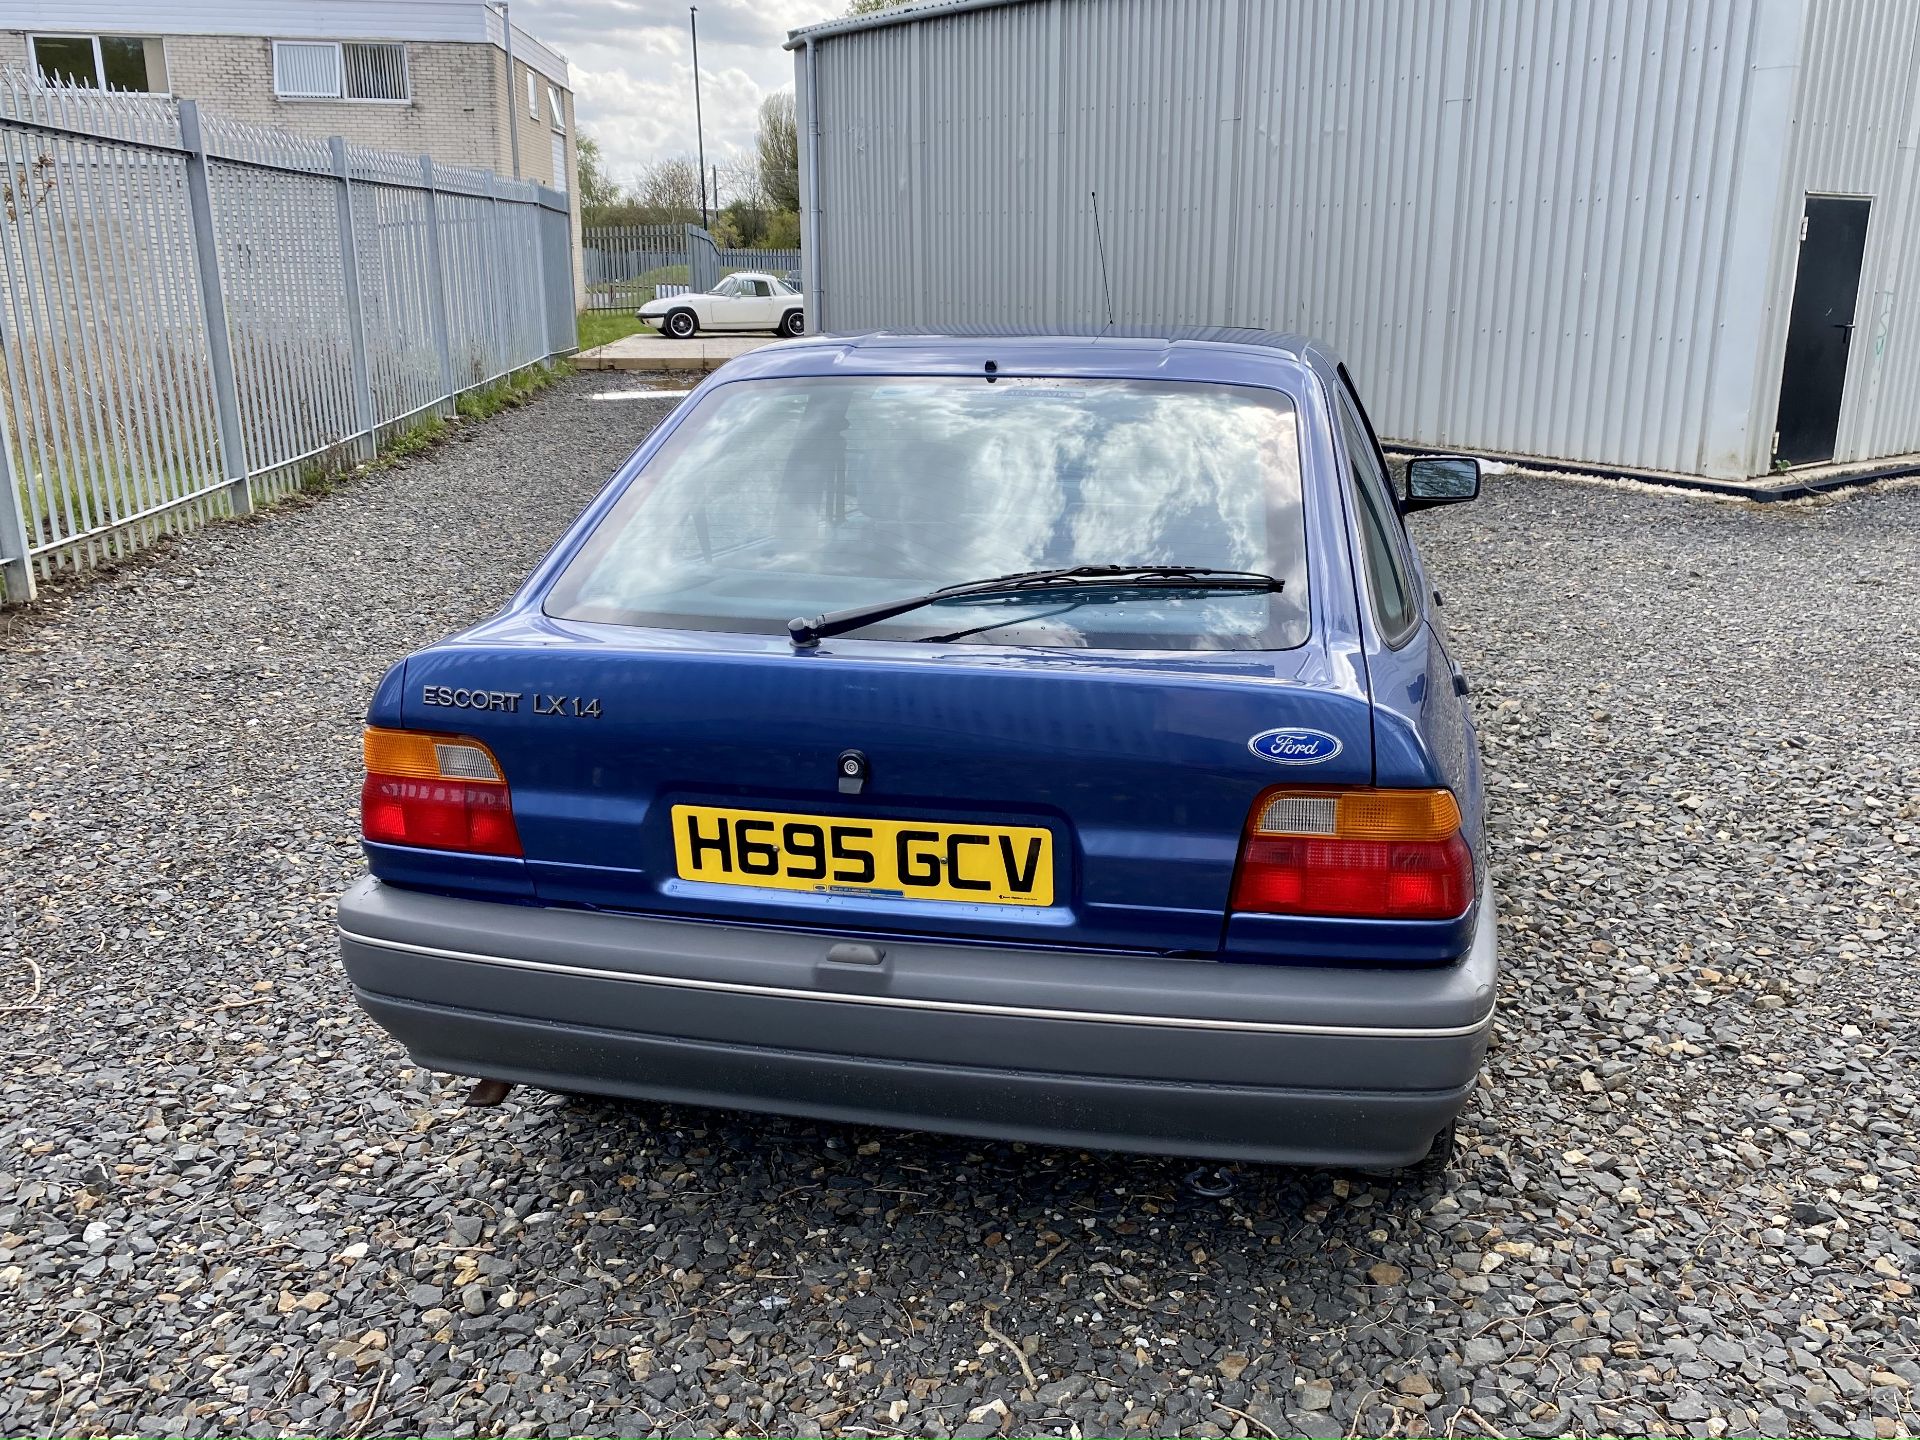 Ford Escort LX1.4 - Image 10 of 54